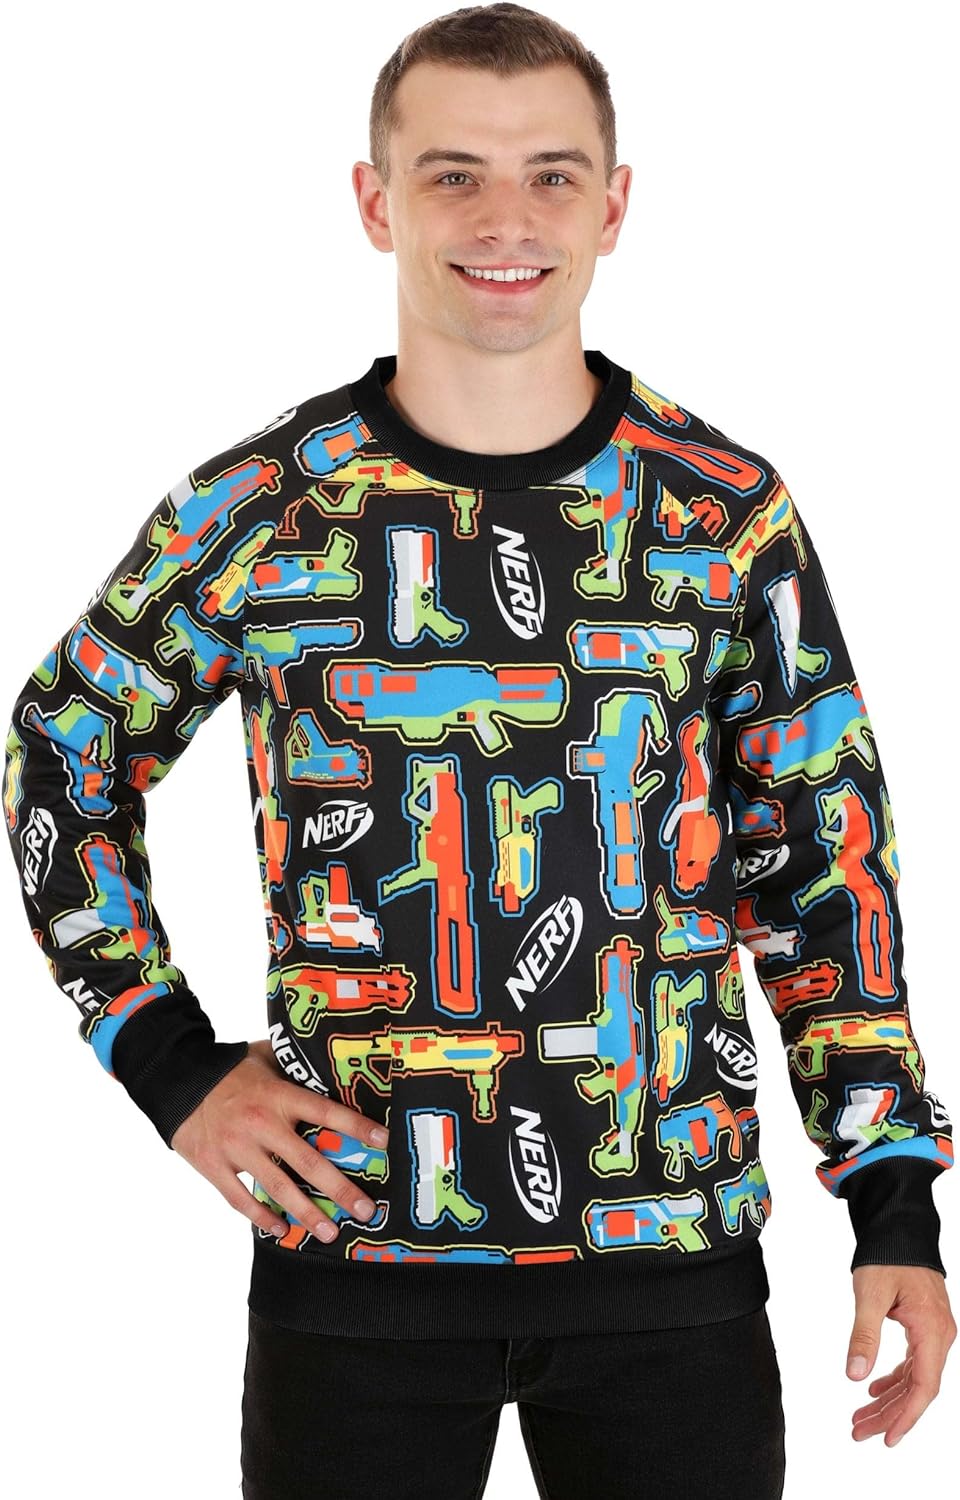 Hasbro NERF Guns Sweater for Adults, Hasbro Nerf Clothing, Funny Ugly Sweaters, Knitted Crewneck Pullover